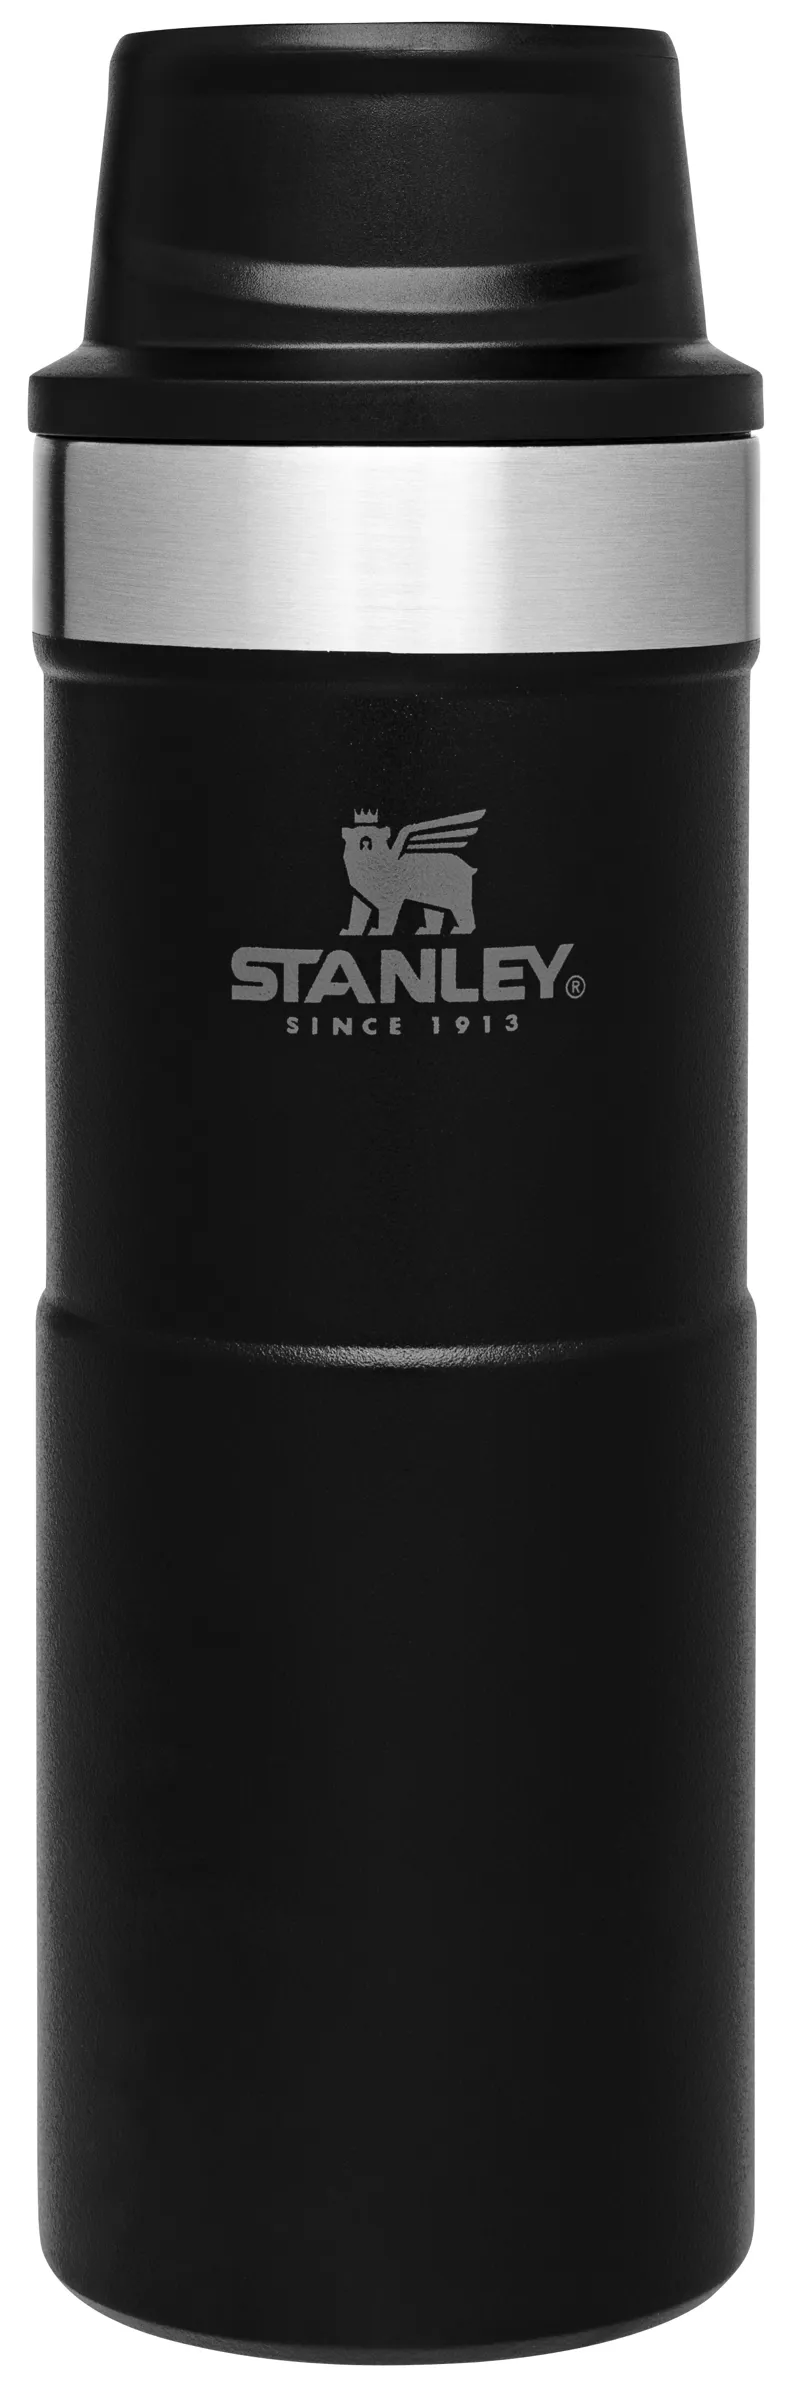 Sleek, Simple, Leakproof: Save 25% on the Stanley Trigger-Action